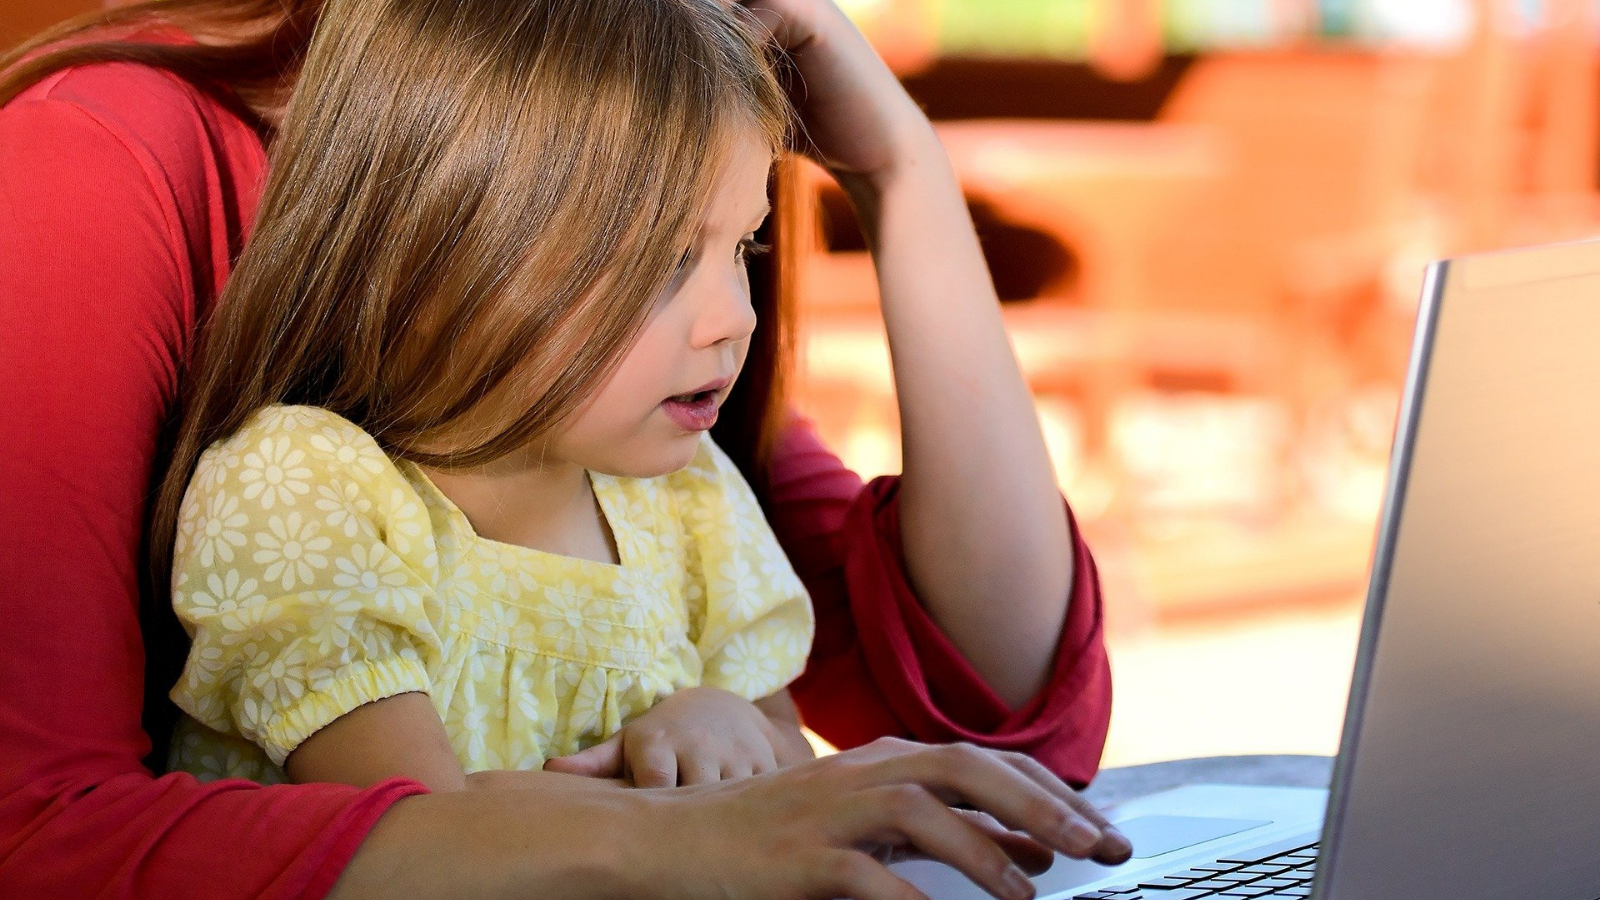 4 online learning resources to help children learn at home